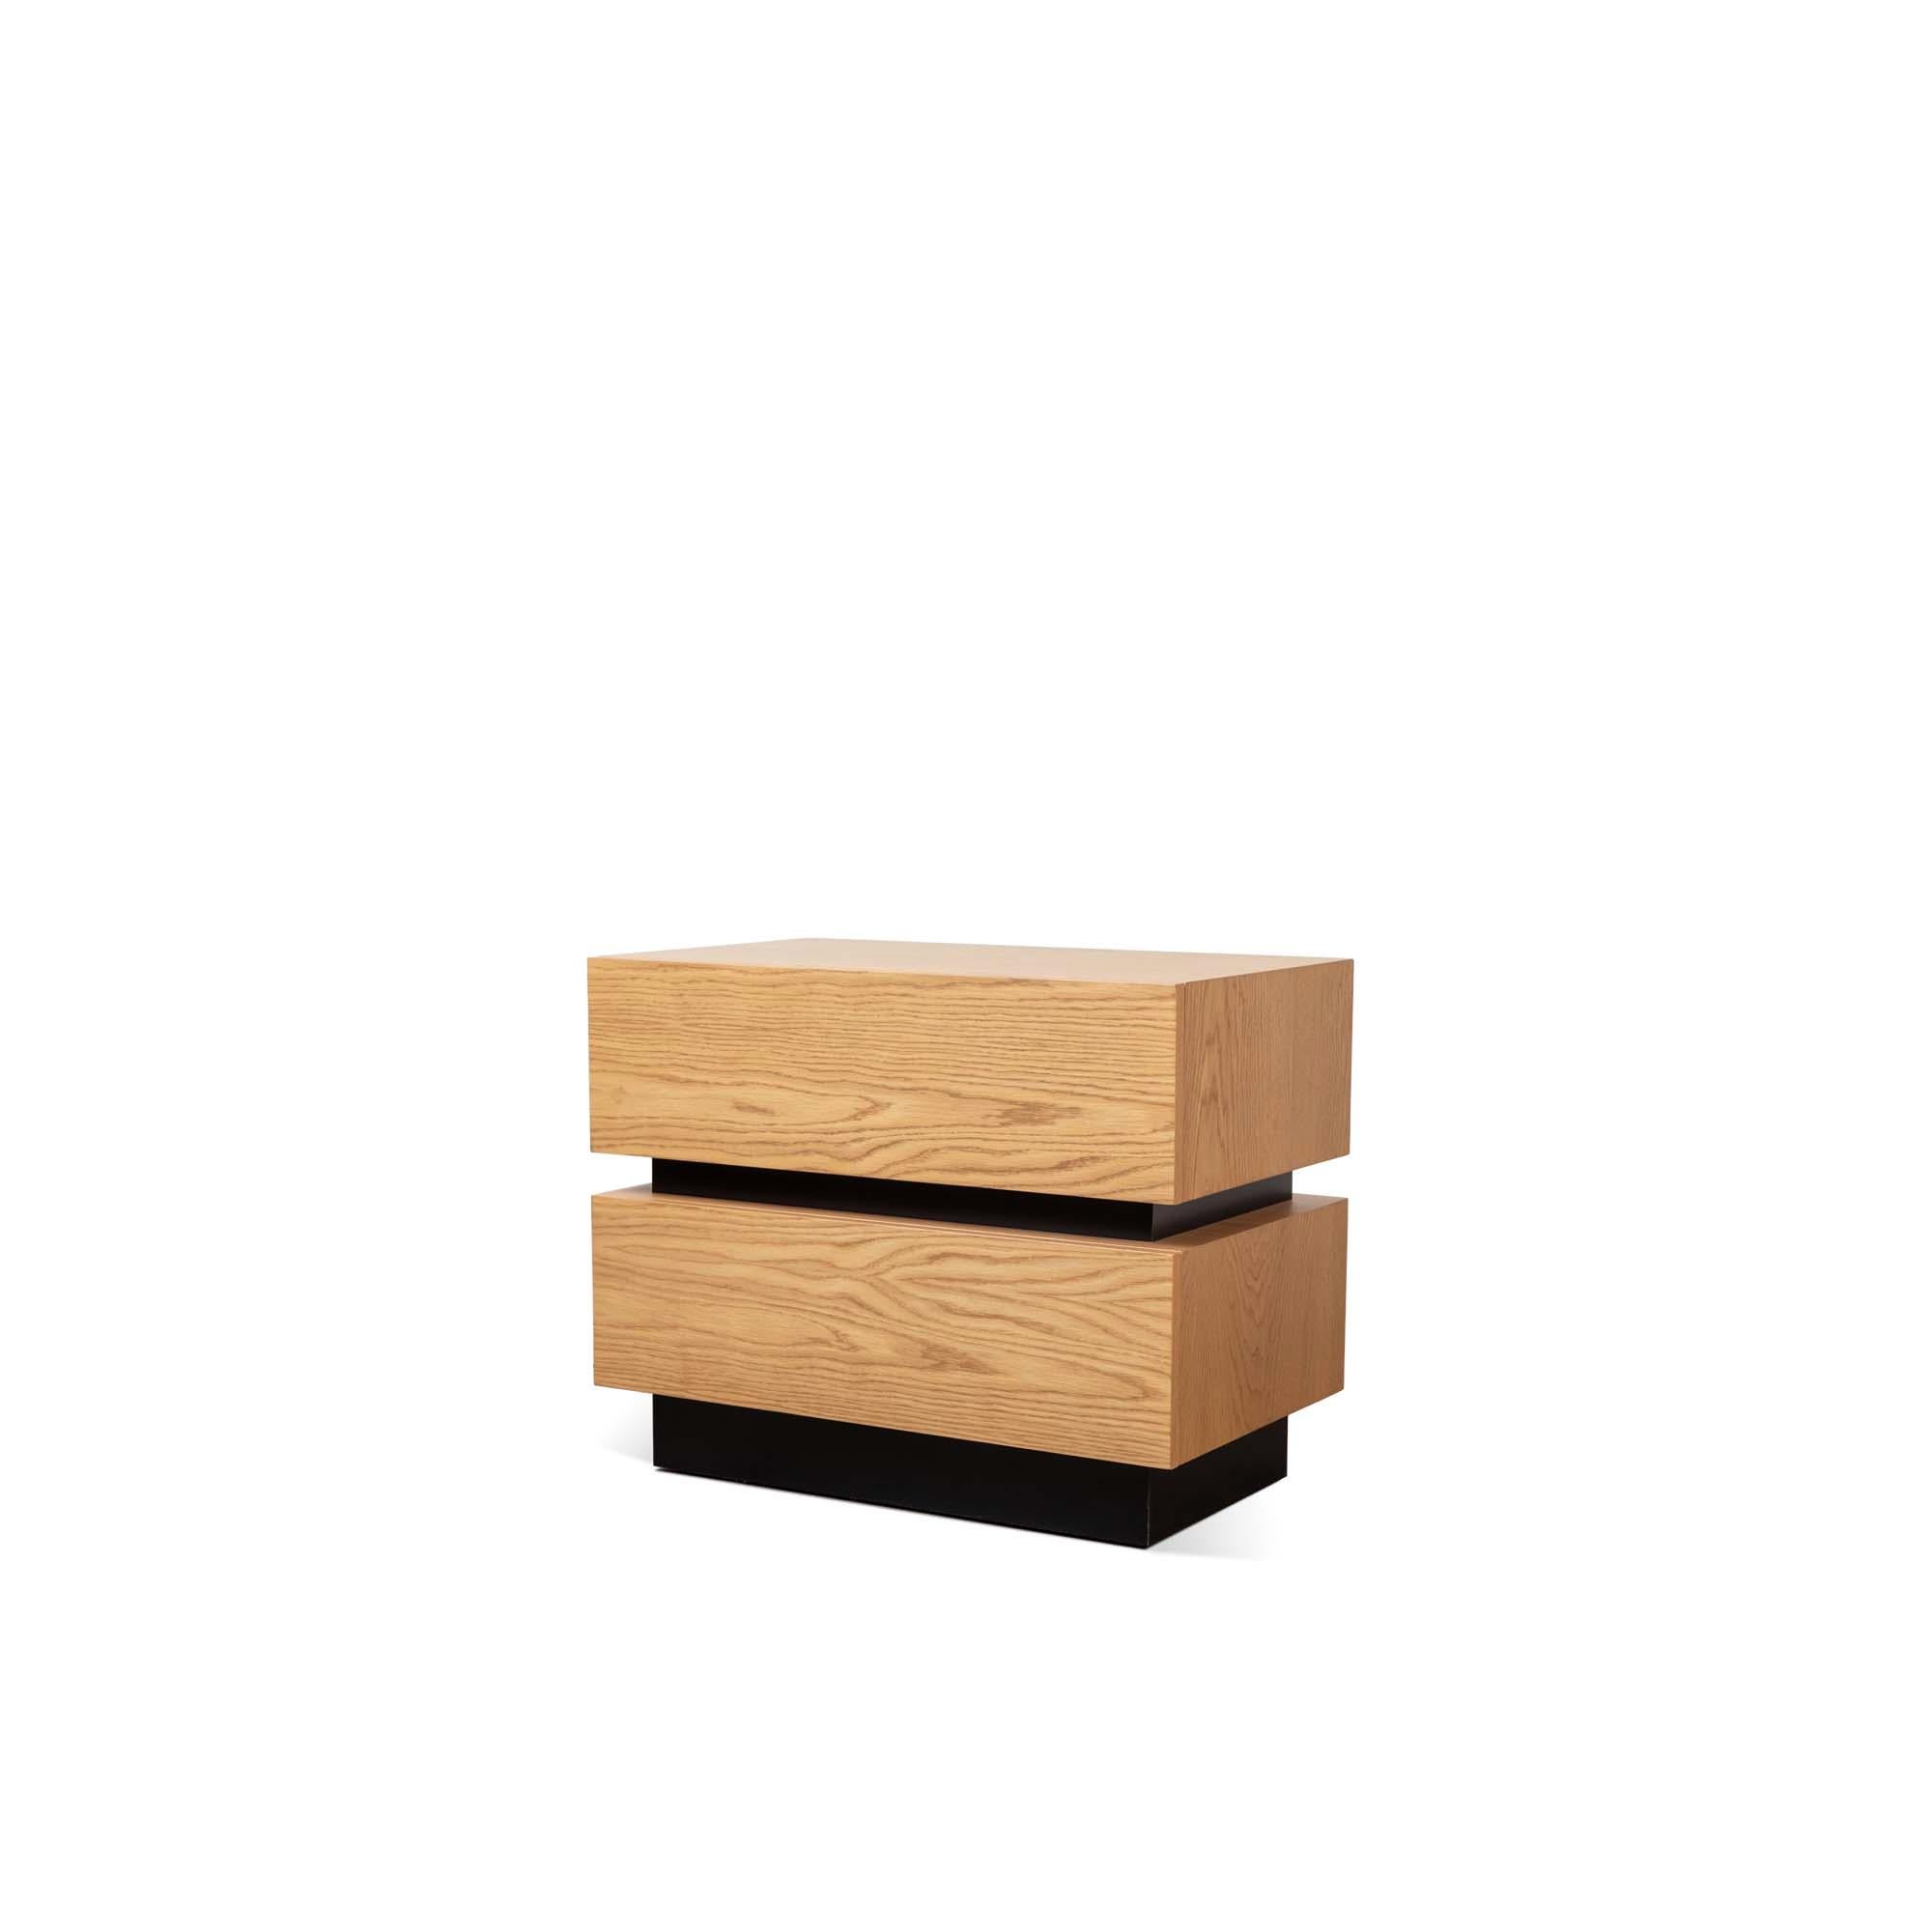 The stacked box nightstand with Metal Inset is a bedside table with two drawers that is available in either American walnut, or white oak and features a metal inset detail between the drawers. Available in two sizes. 

The Lawson-Fenning Collection